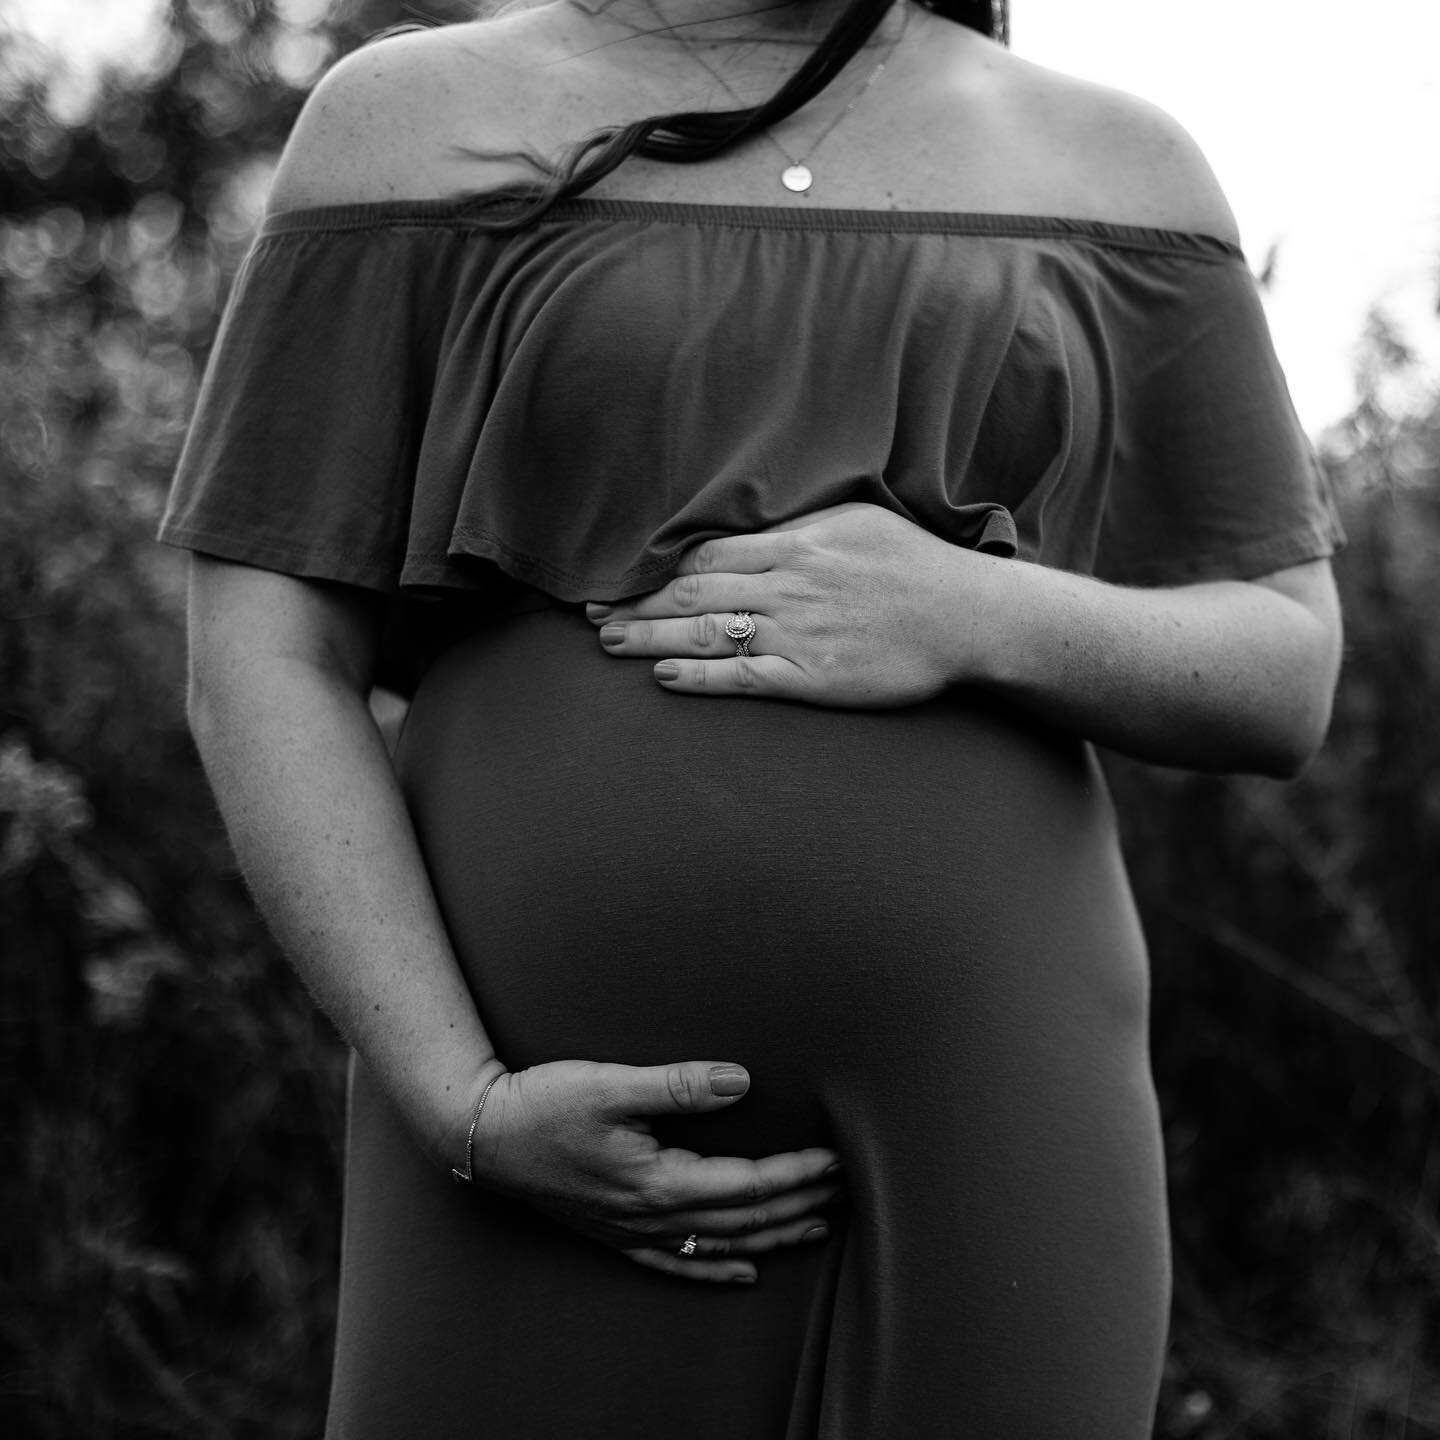 All about the maternity sessions this fall! It&rsquo;s even sweeter with old friends for whom I&rsquo;ve had the honor of shooting their engagement and wedding photos 💜